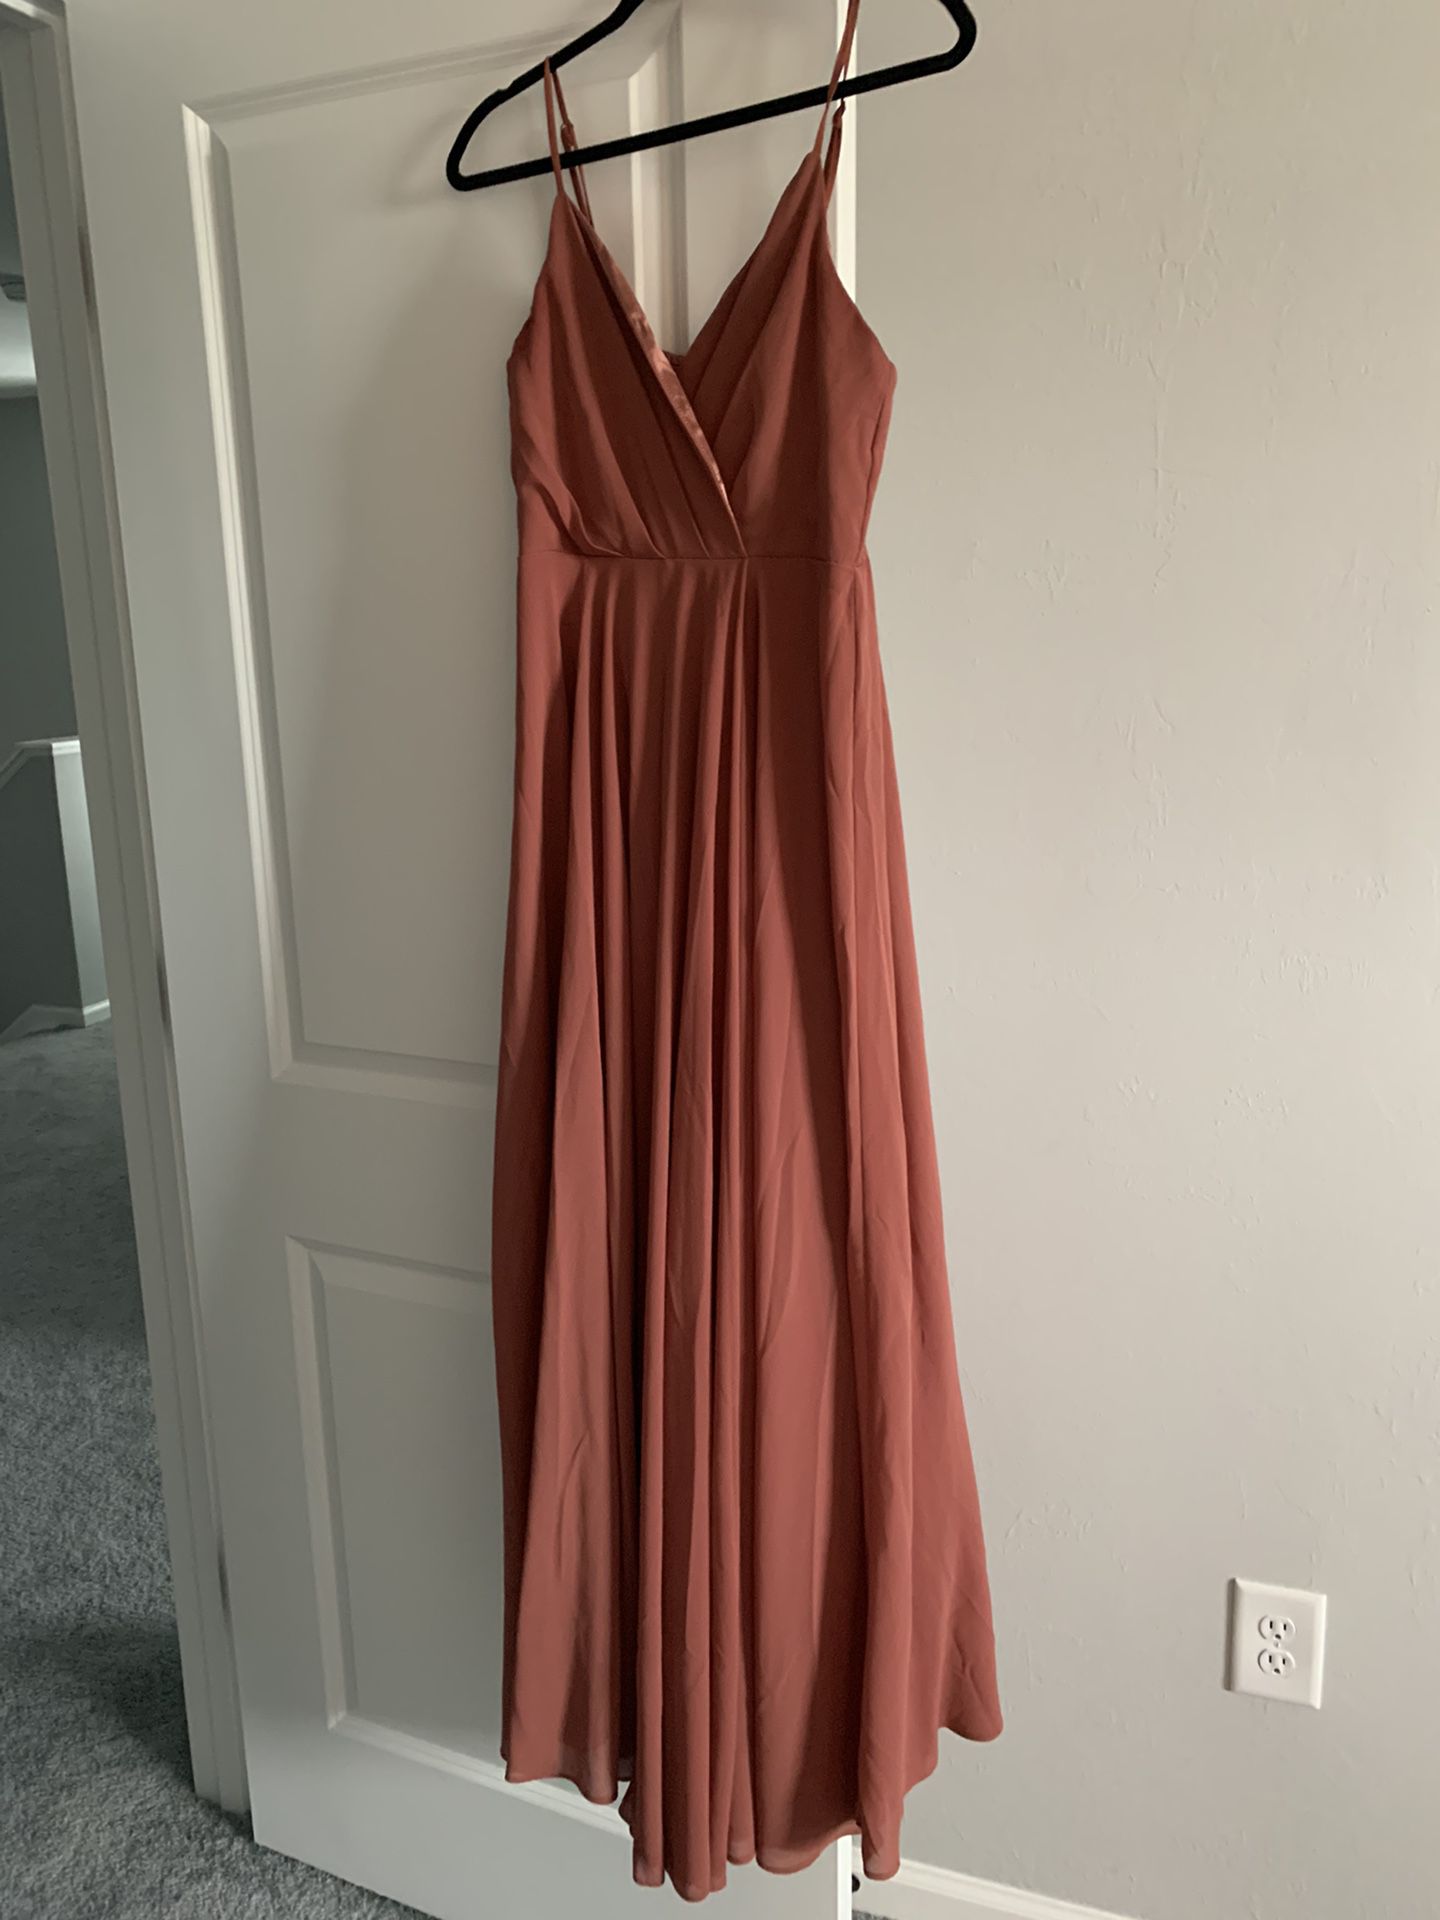 Lulus All About Love Dusty Rose Maxi Dress Size 8